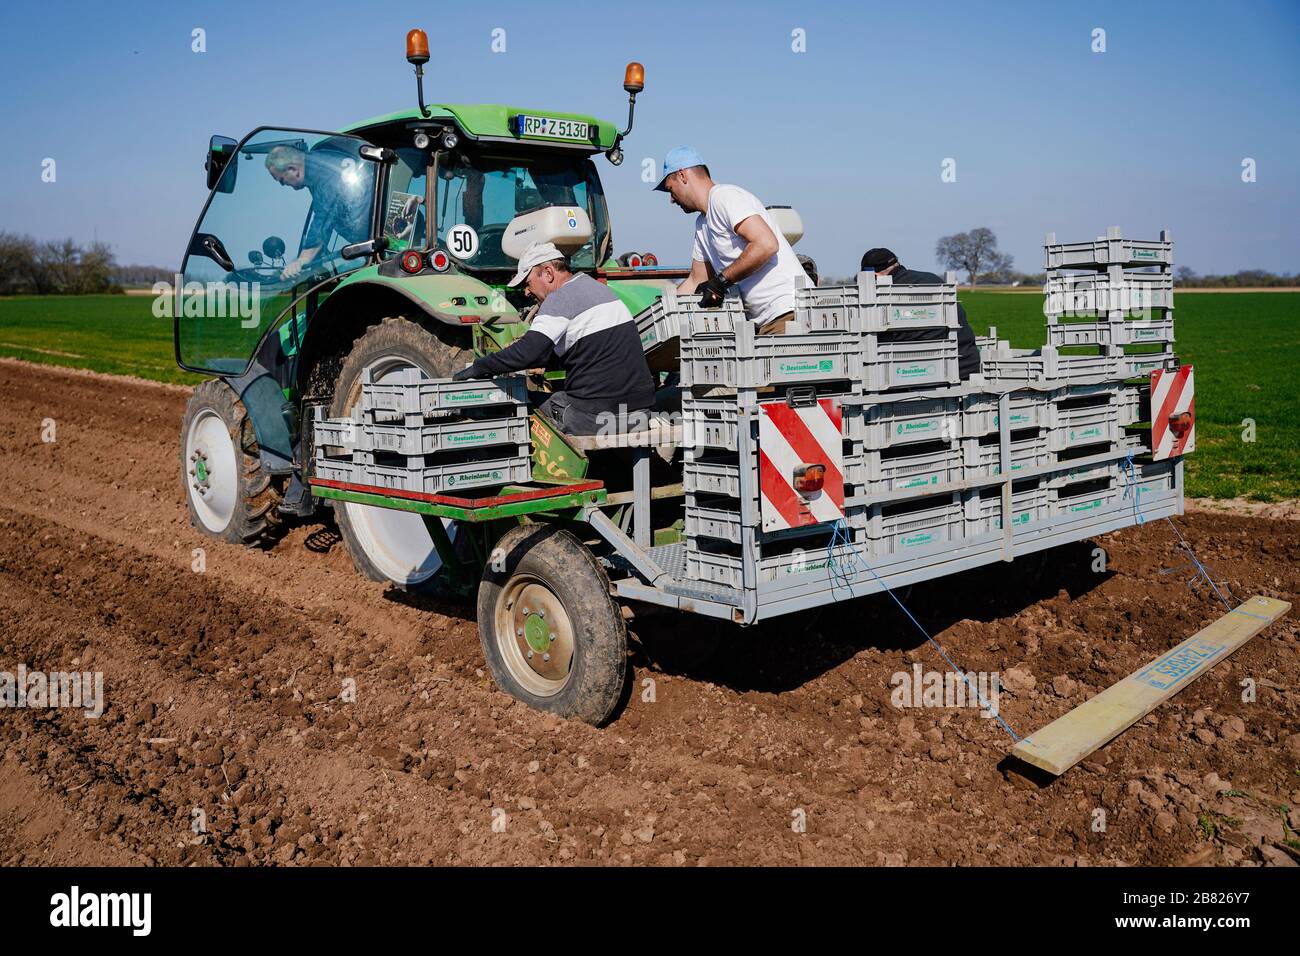 19 March 2020, Rhineland-Palatinate, Böhl-Iggelheim: Field workers on a tractor plant early potatoes of the Annabelle variety in a field. In the climatically favoured Vorderpfalz the planting of the first early potatoes of the season has begun. Photo: Uwe Anspach/dpa Stock Photo